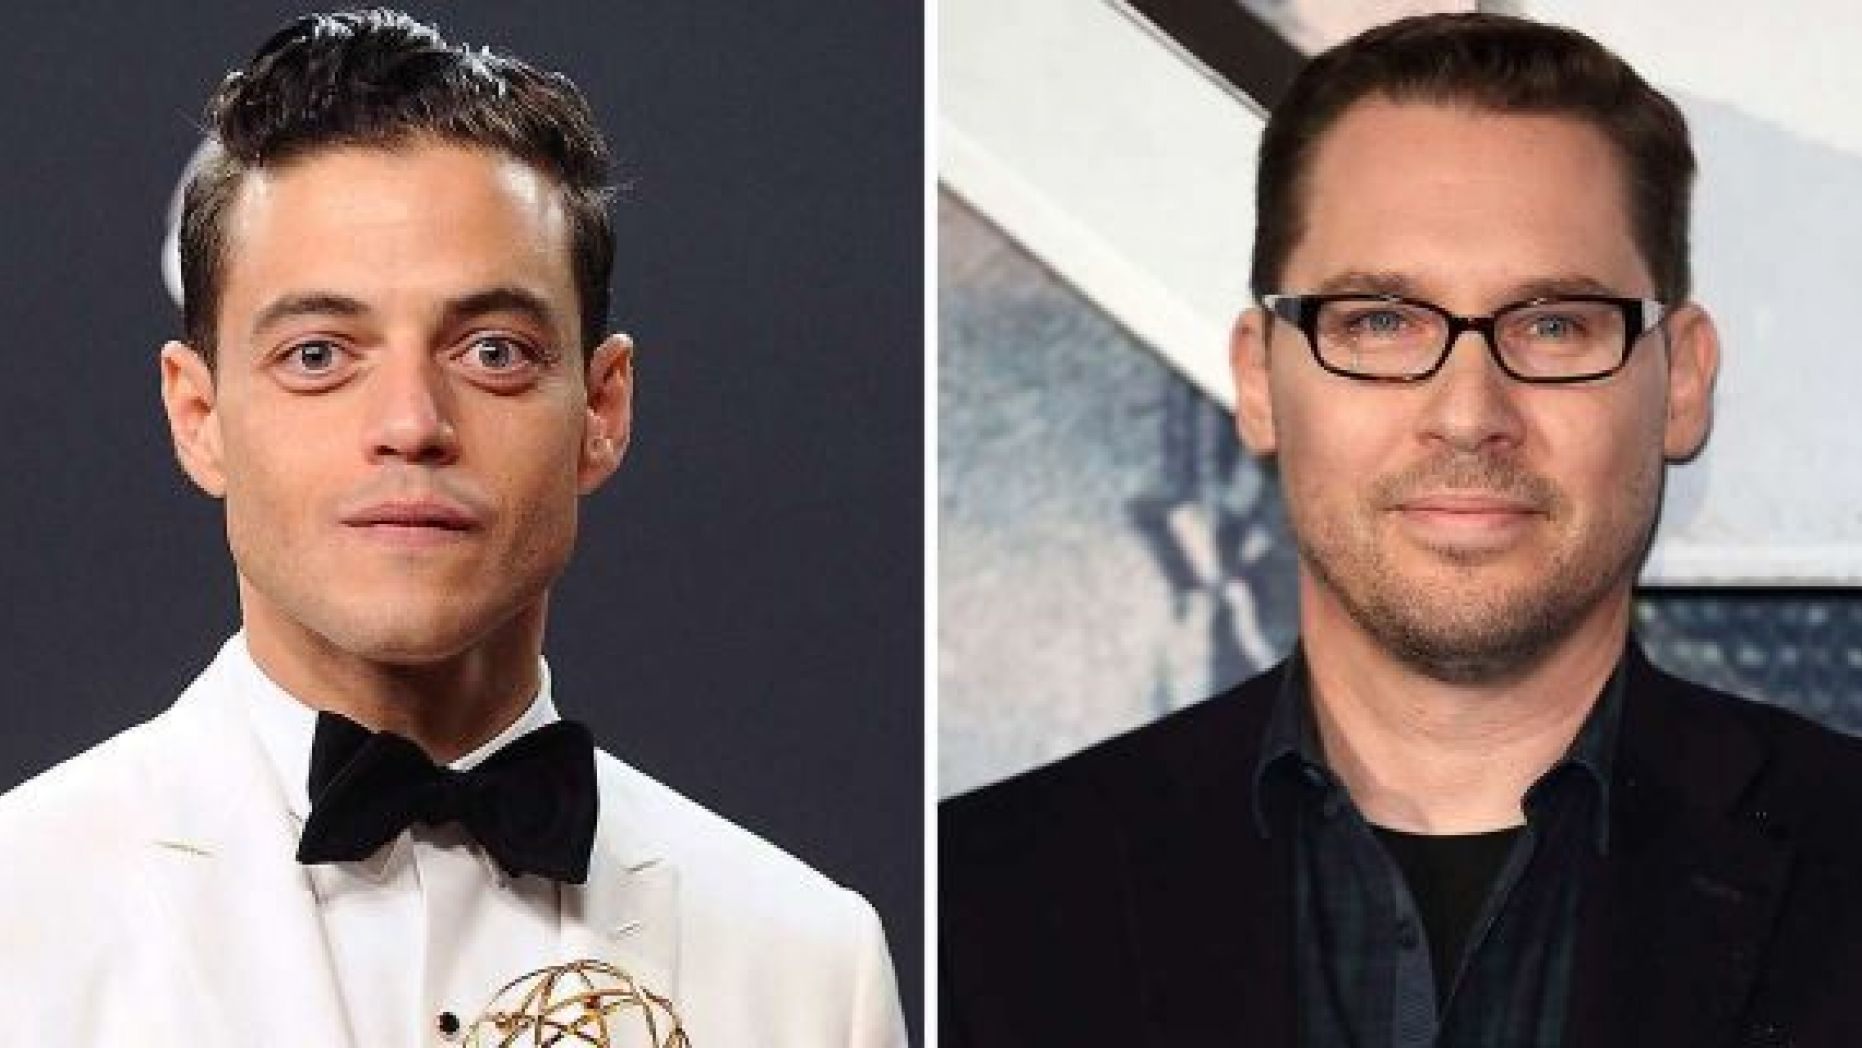 Rami Malek has spoken out about the continued allegations of sexual abuse against Bryan Singer, who directed Malek's recent film "Bohemian Rhapsody"